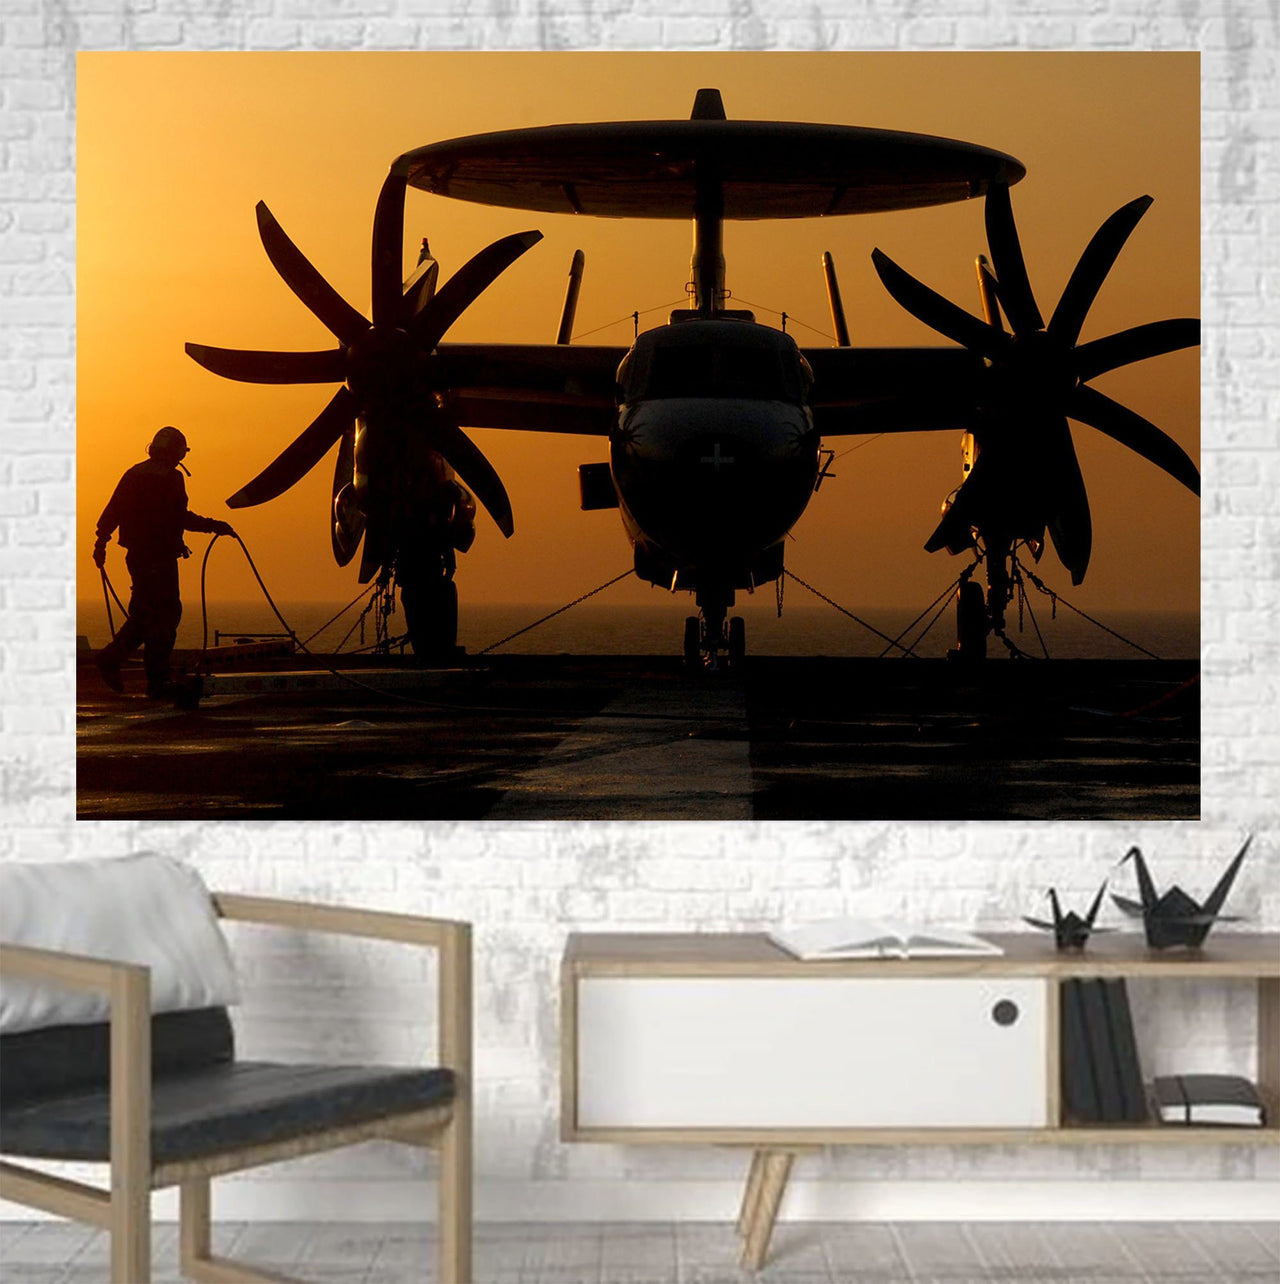 Military Plane at Sunset Printed Canvas Posters (1 Piece) Aviation Shop 